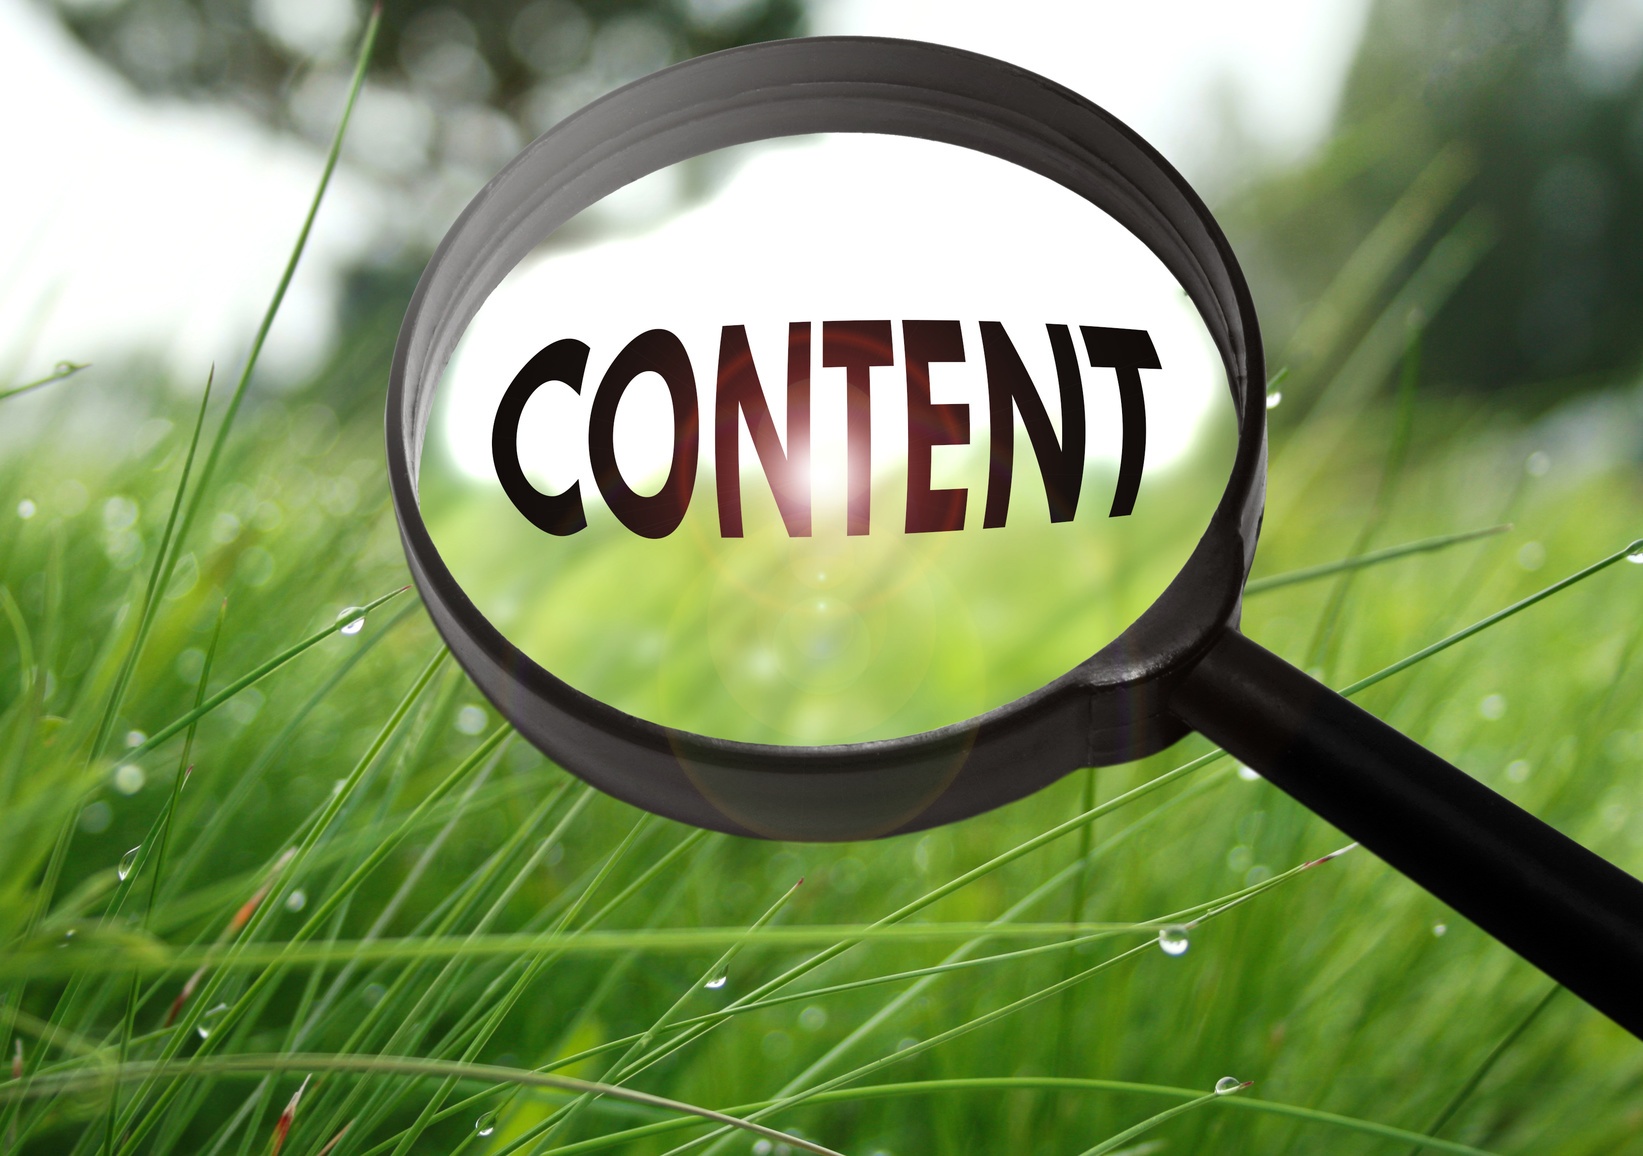 What is Your Marketing Content Missing? (Infographic)